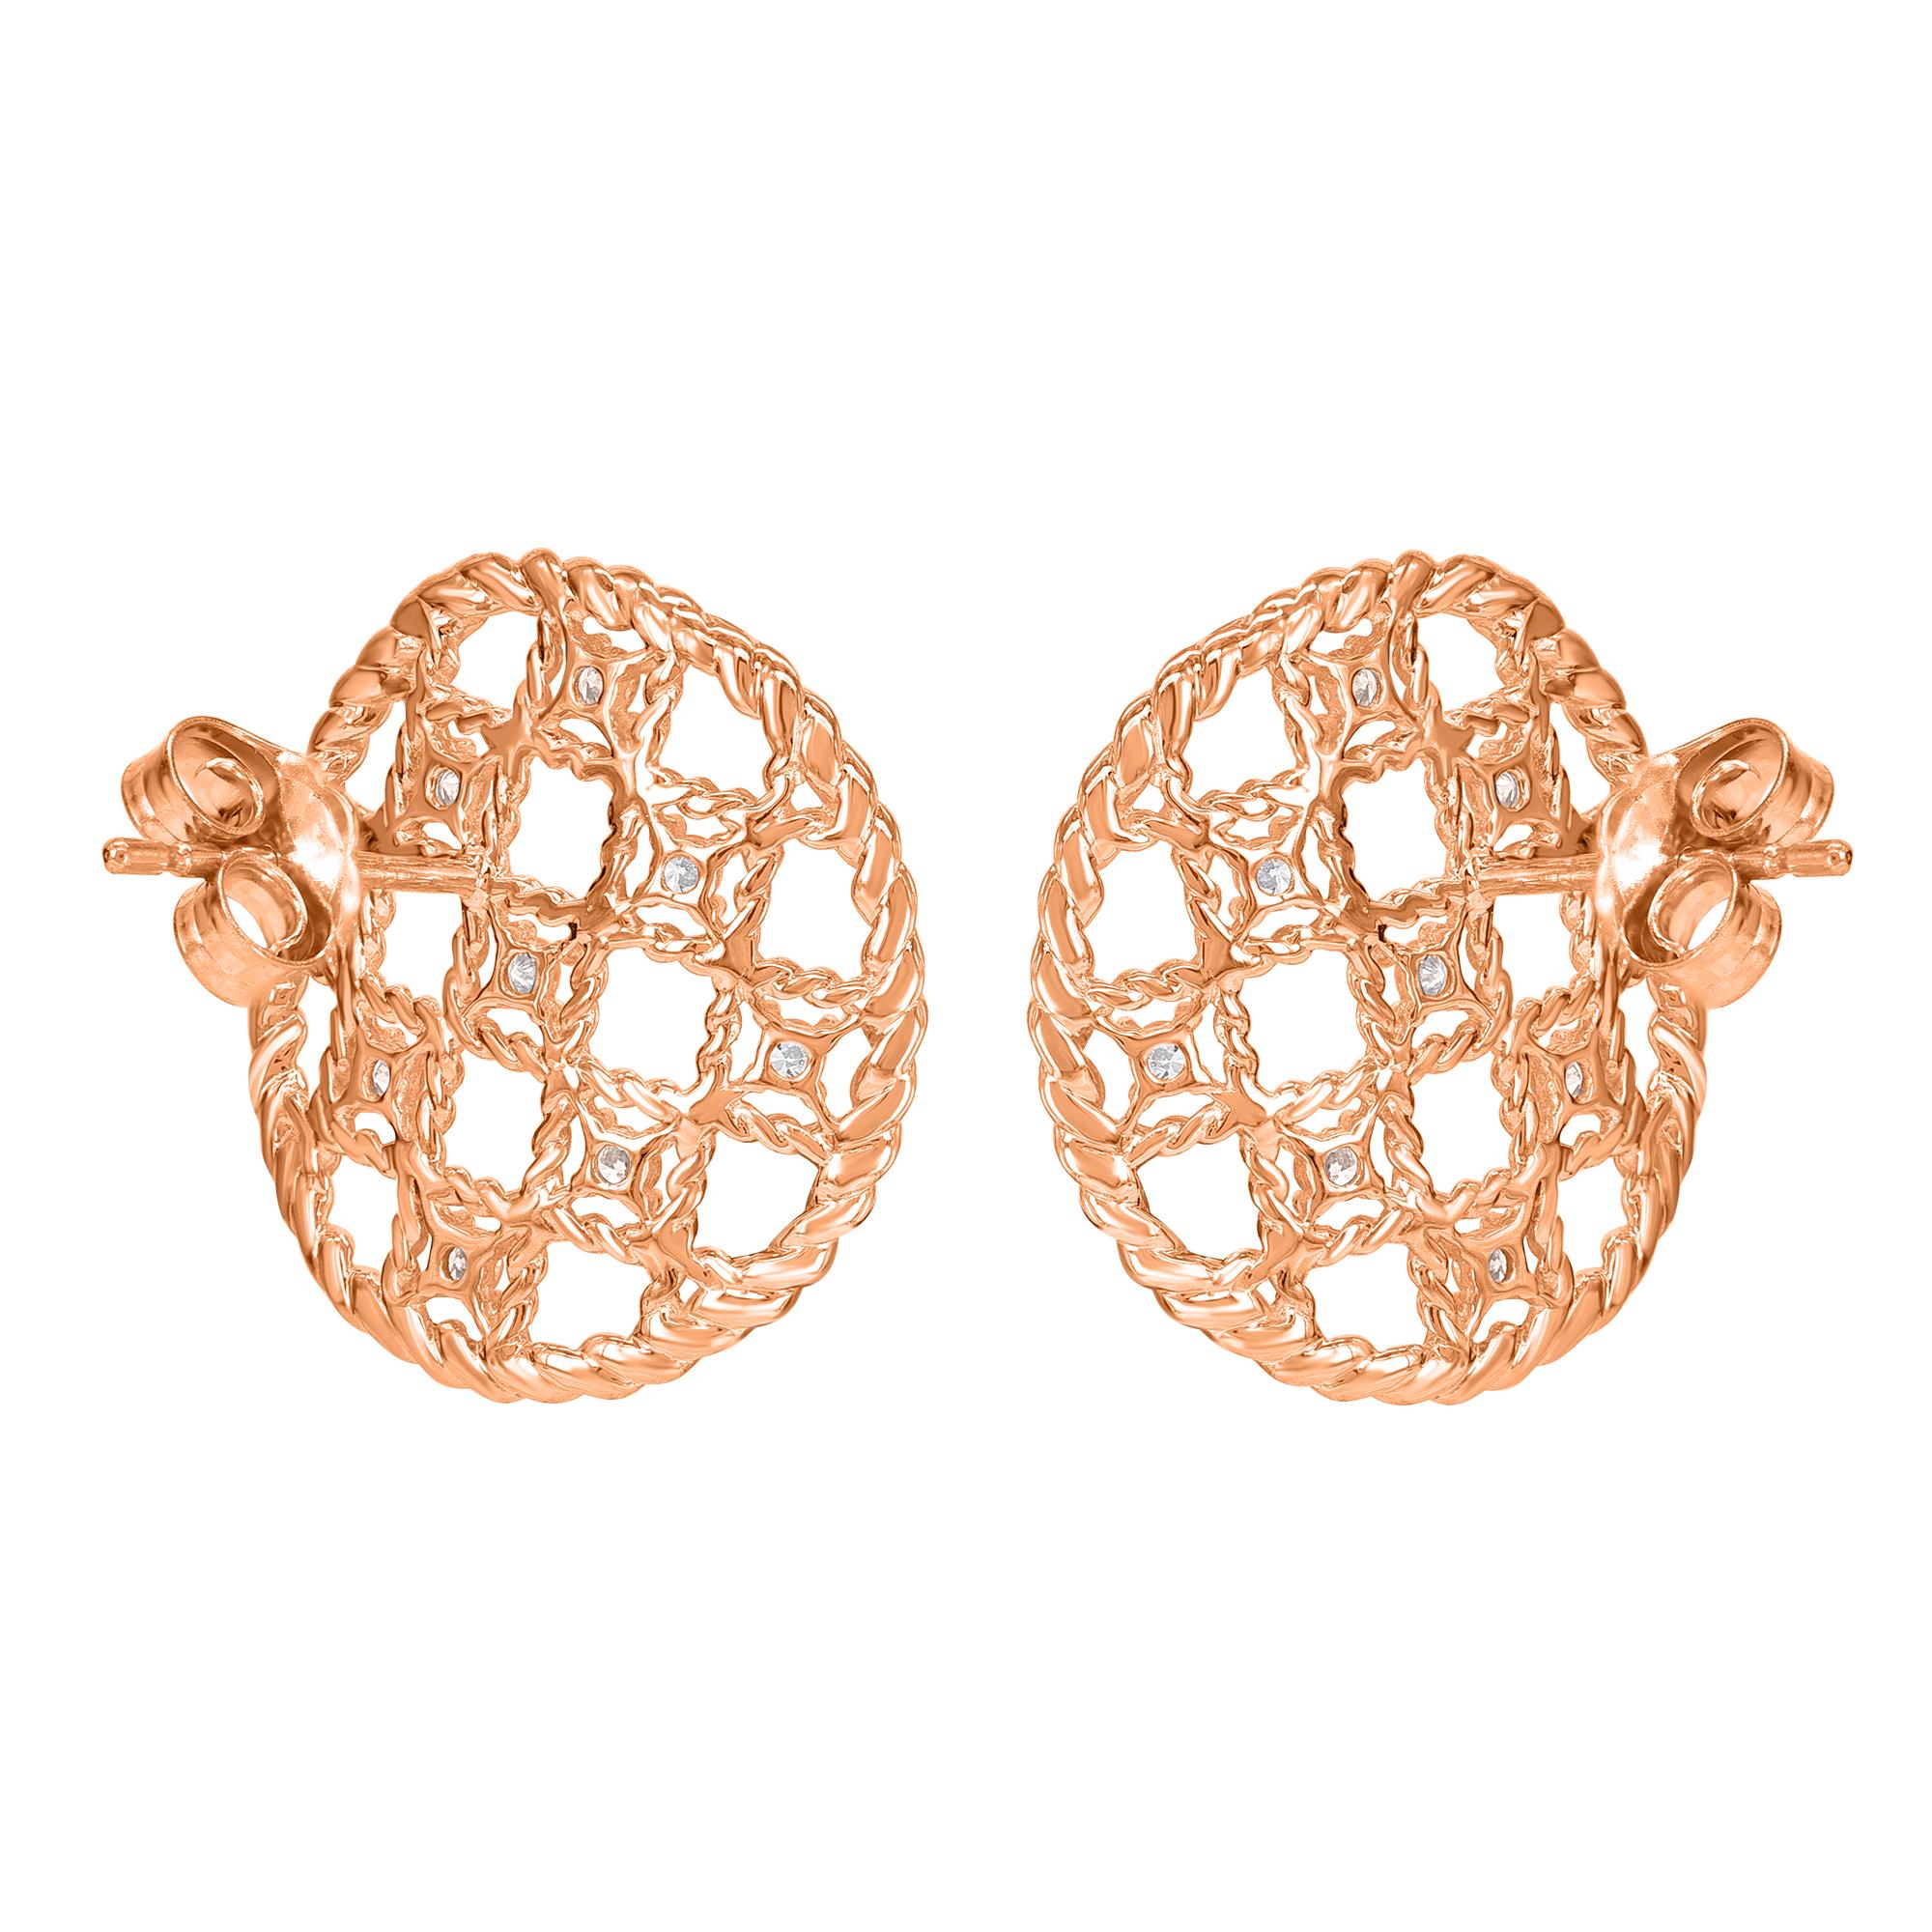 TJD 0.25 Carat Round Diamond 14 Karat Rose Gold Twisted Circle Stud Earrings In New Condition For Sale In New York, NY